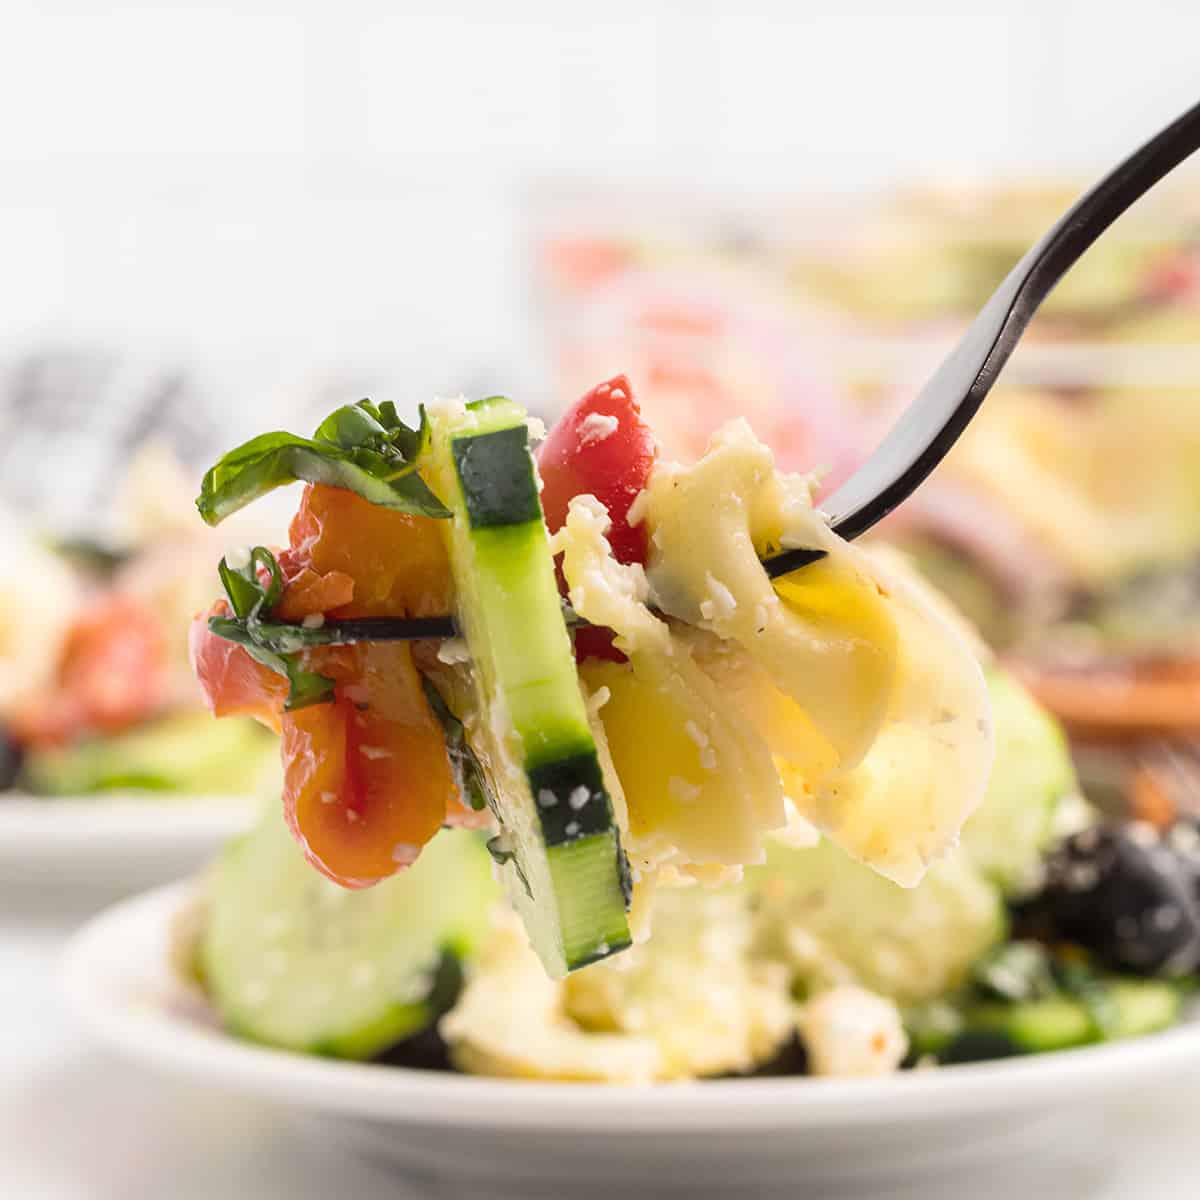 A fork holding one bite of salad.